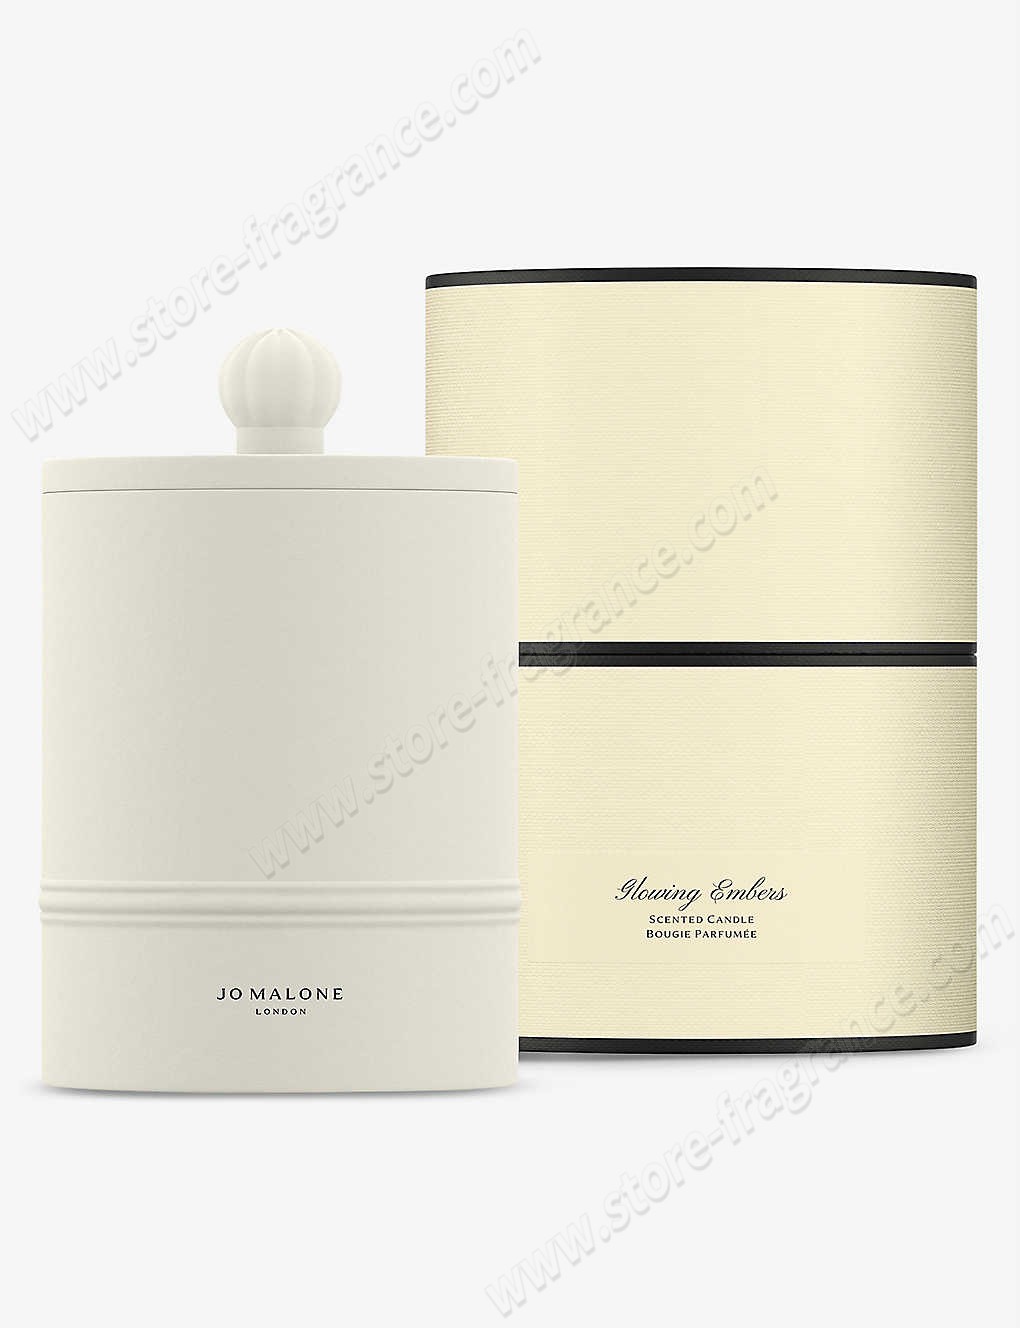 JO MALONE LONDON/Glowing Embers scented candle 300g ✿ Discount Store - -1